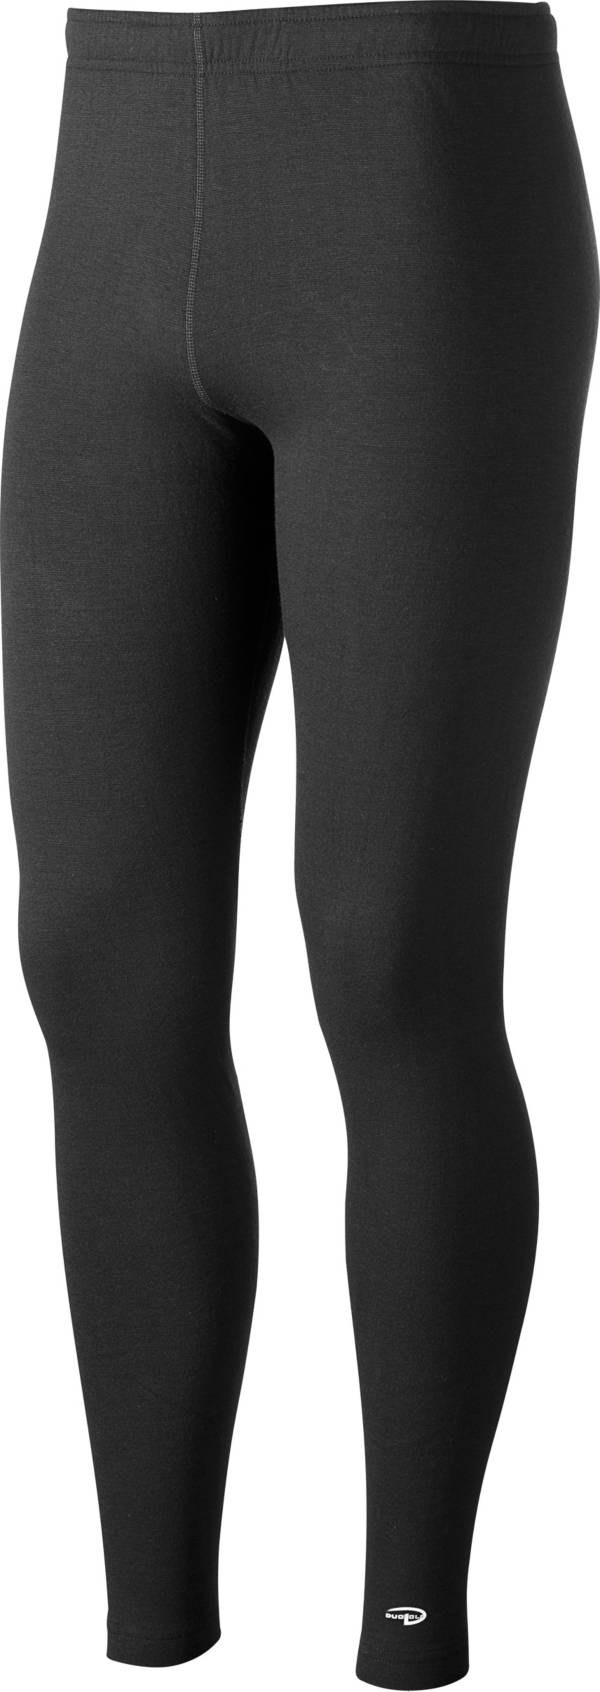 KMC8 - Duofold Varitherm Mid-Weight Mens Tights Style Ankle Length